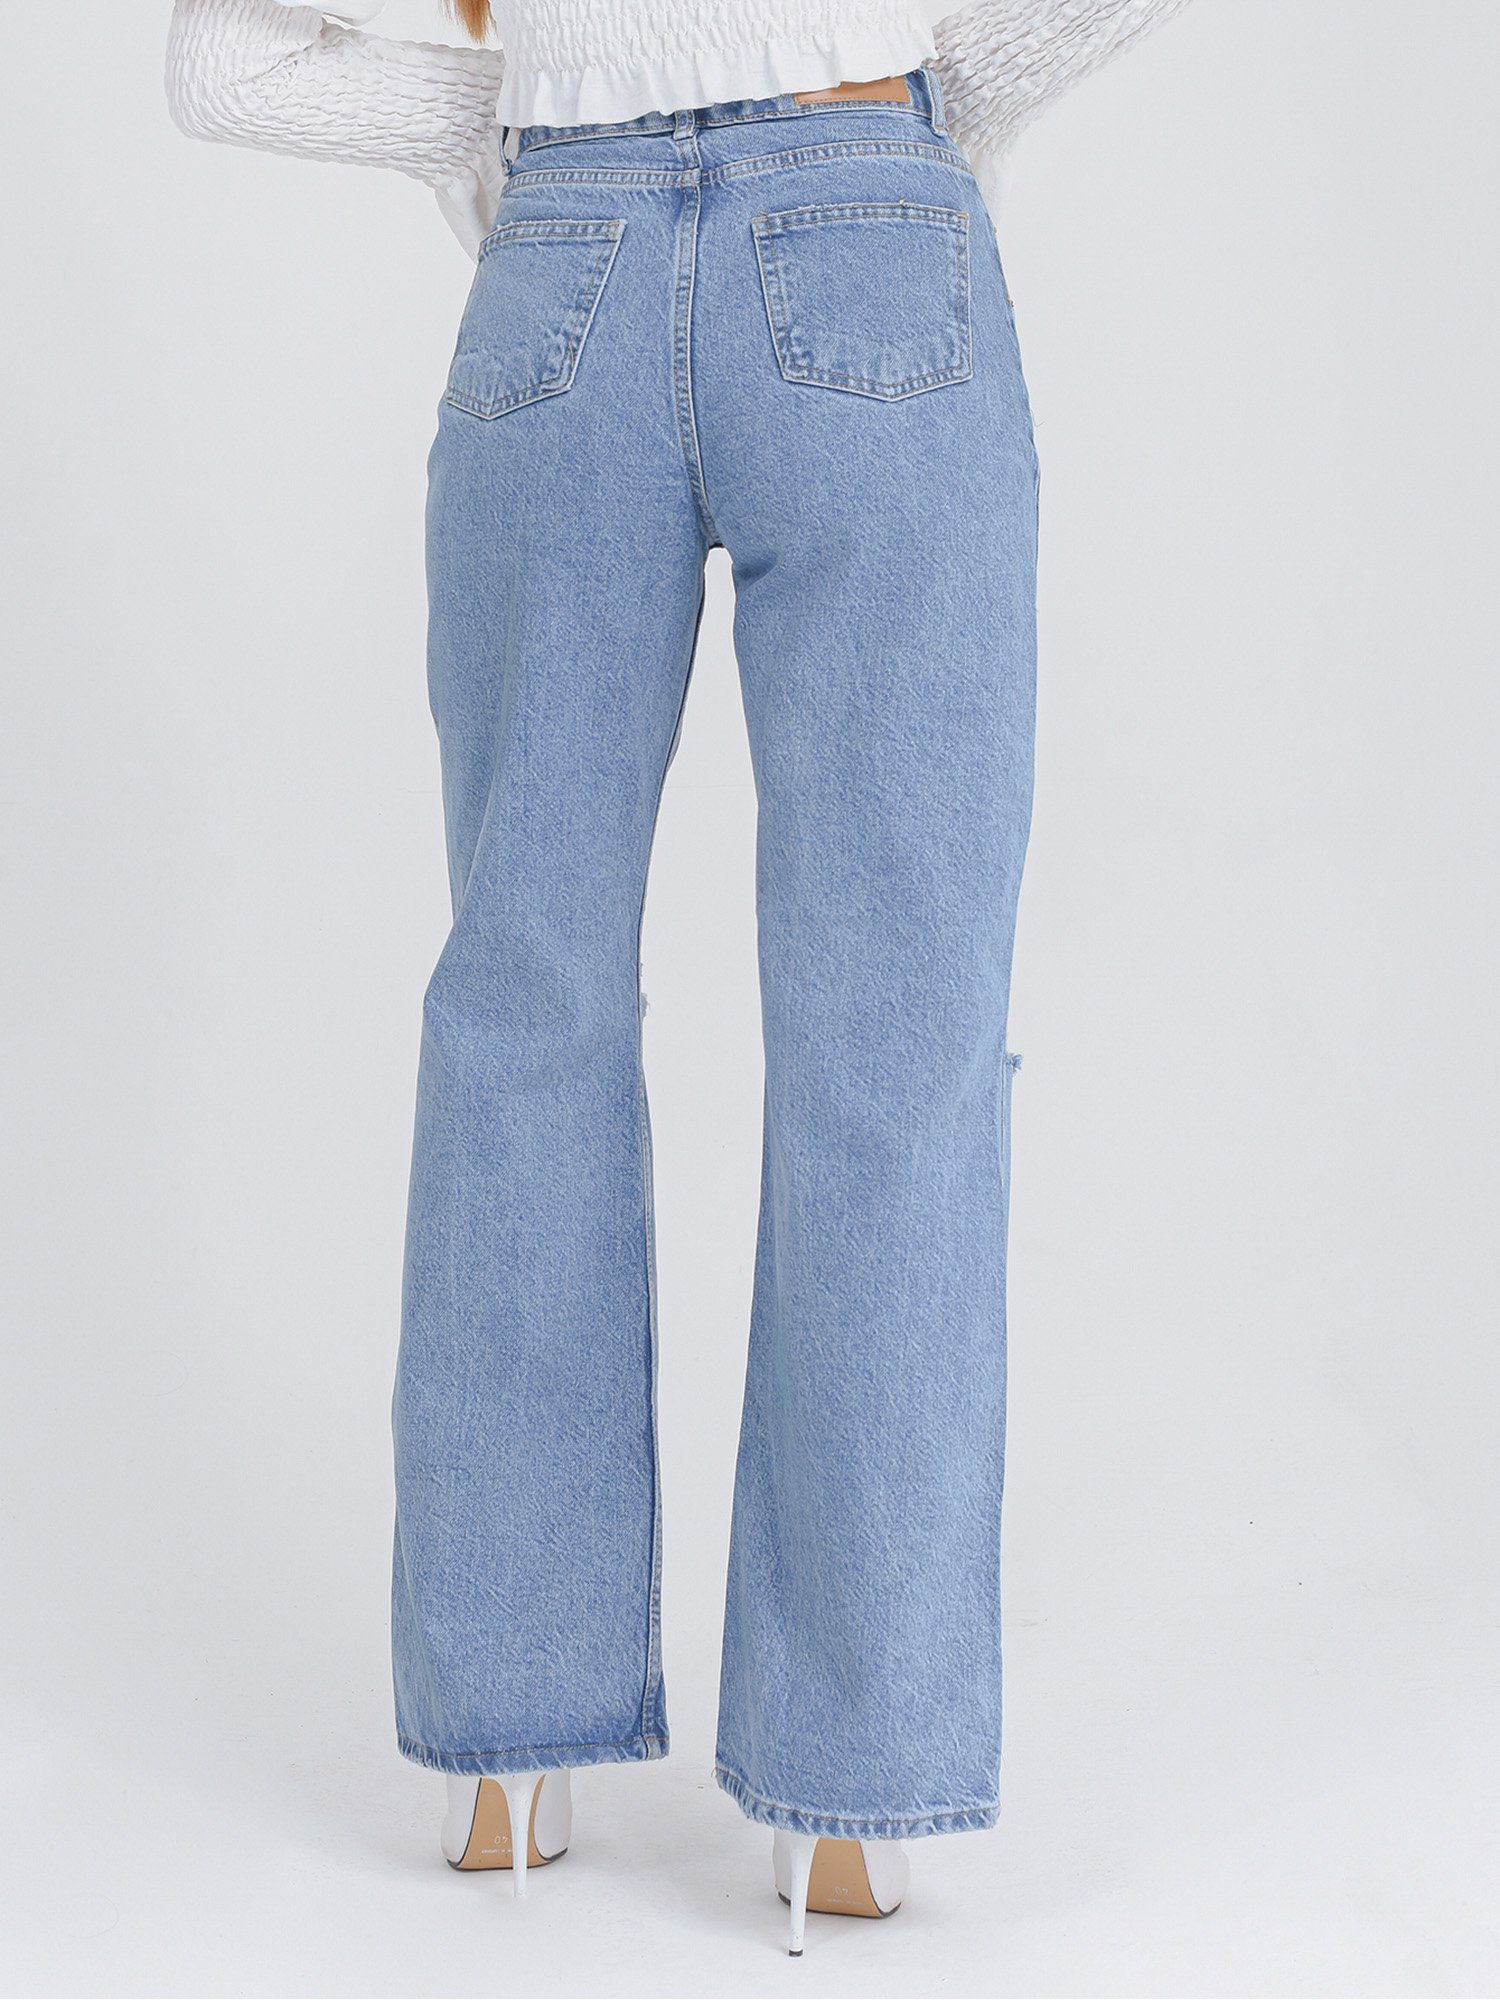 Freshlions Weite 'CECILE' Freshlions Jeans Jeans